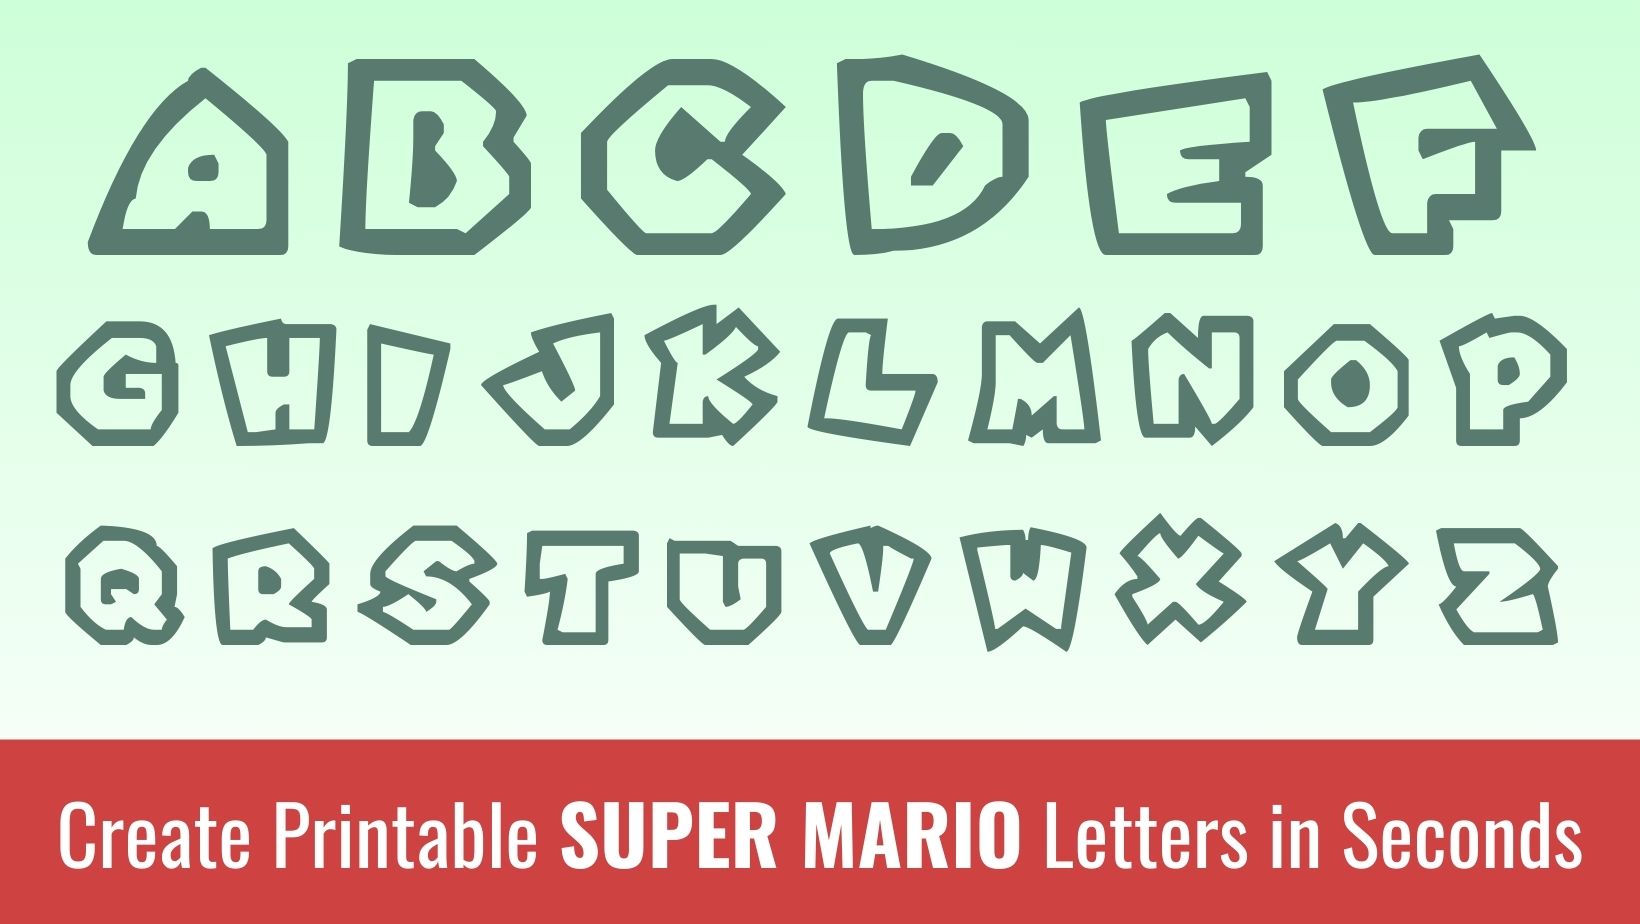 Printable super mario Letters: Free Alphabet Font and Letter Templates